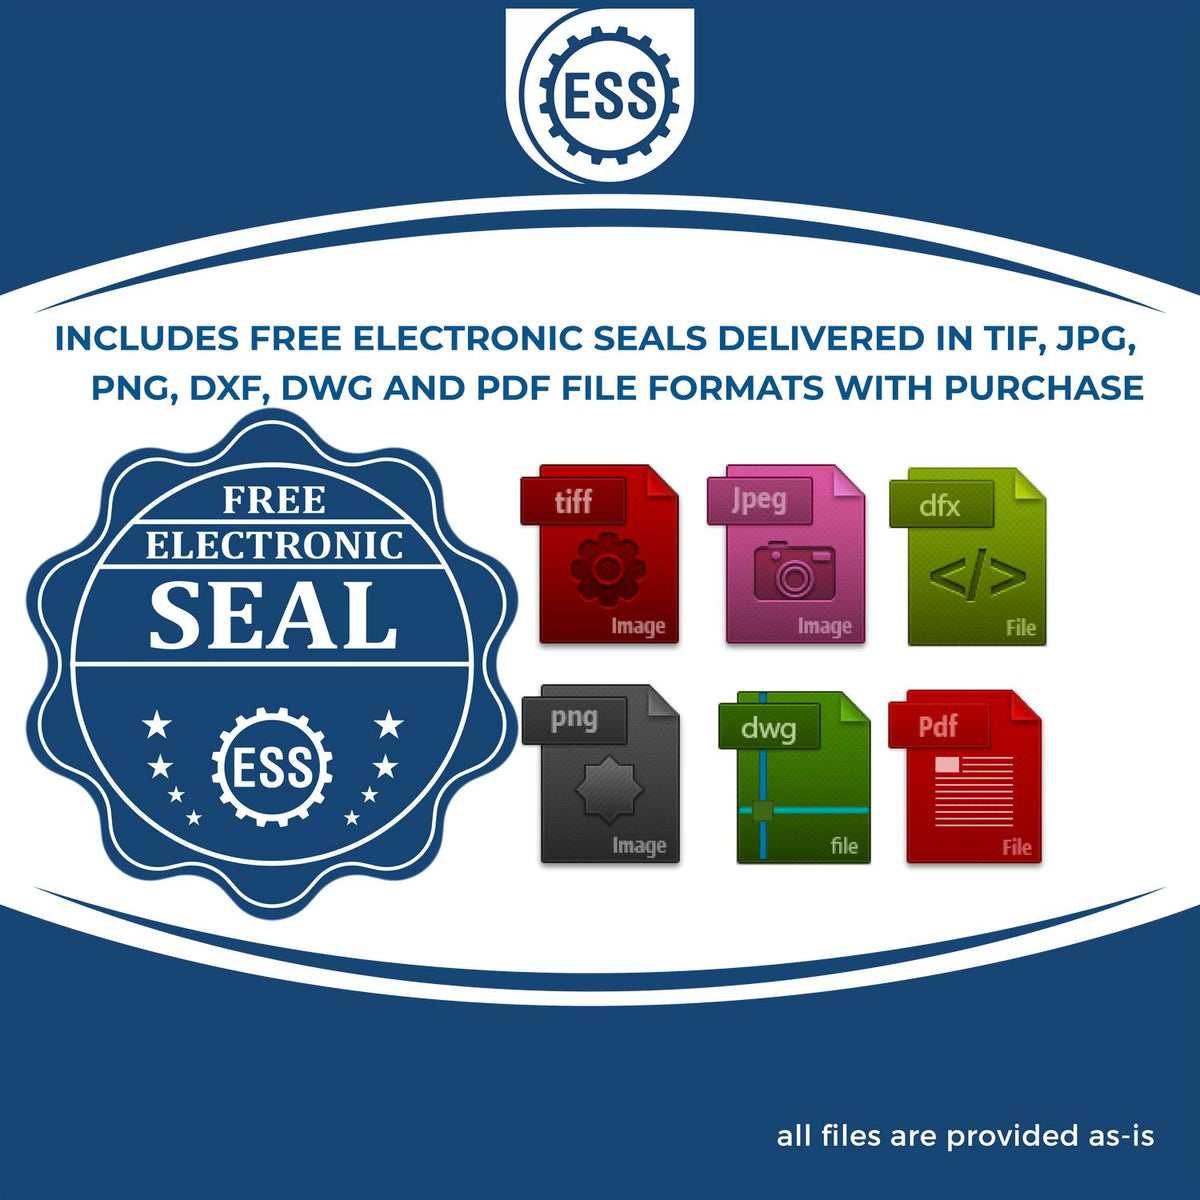 An infographic for the free electronic seal for the Slim Pre-Inked Washington Professional Engineer Seal Stamp illustrating the different file type icons such as DXF, DWG, TIF, JPG and PNG.